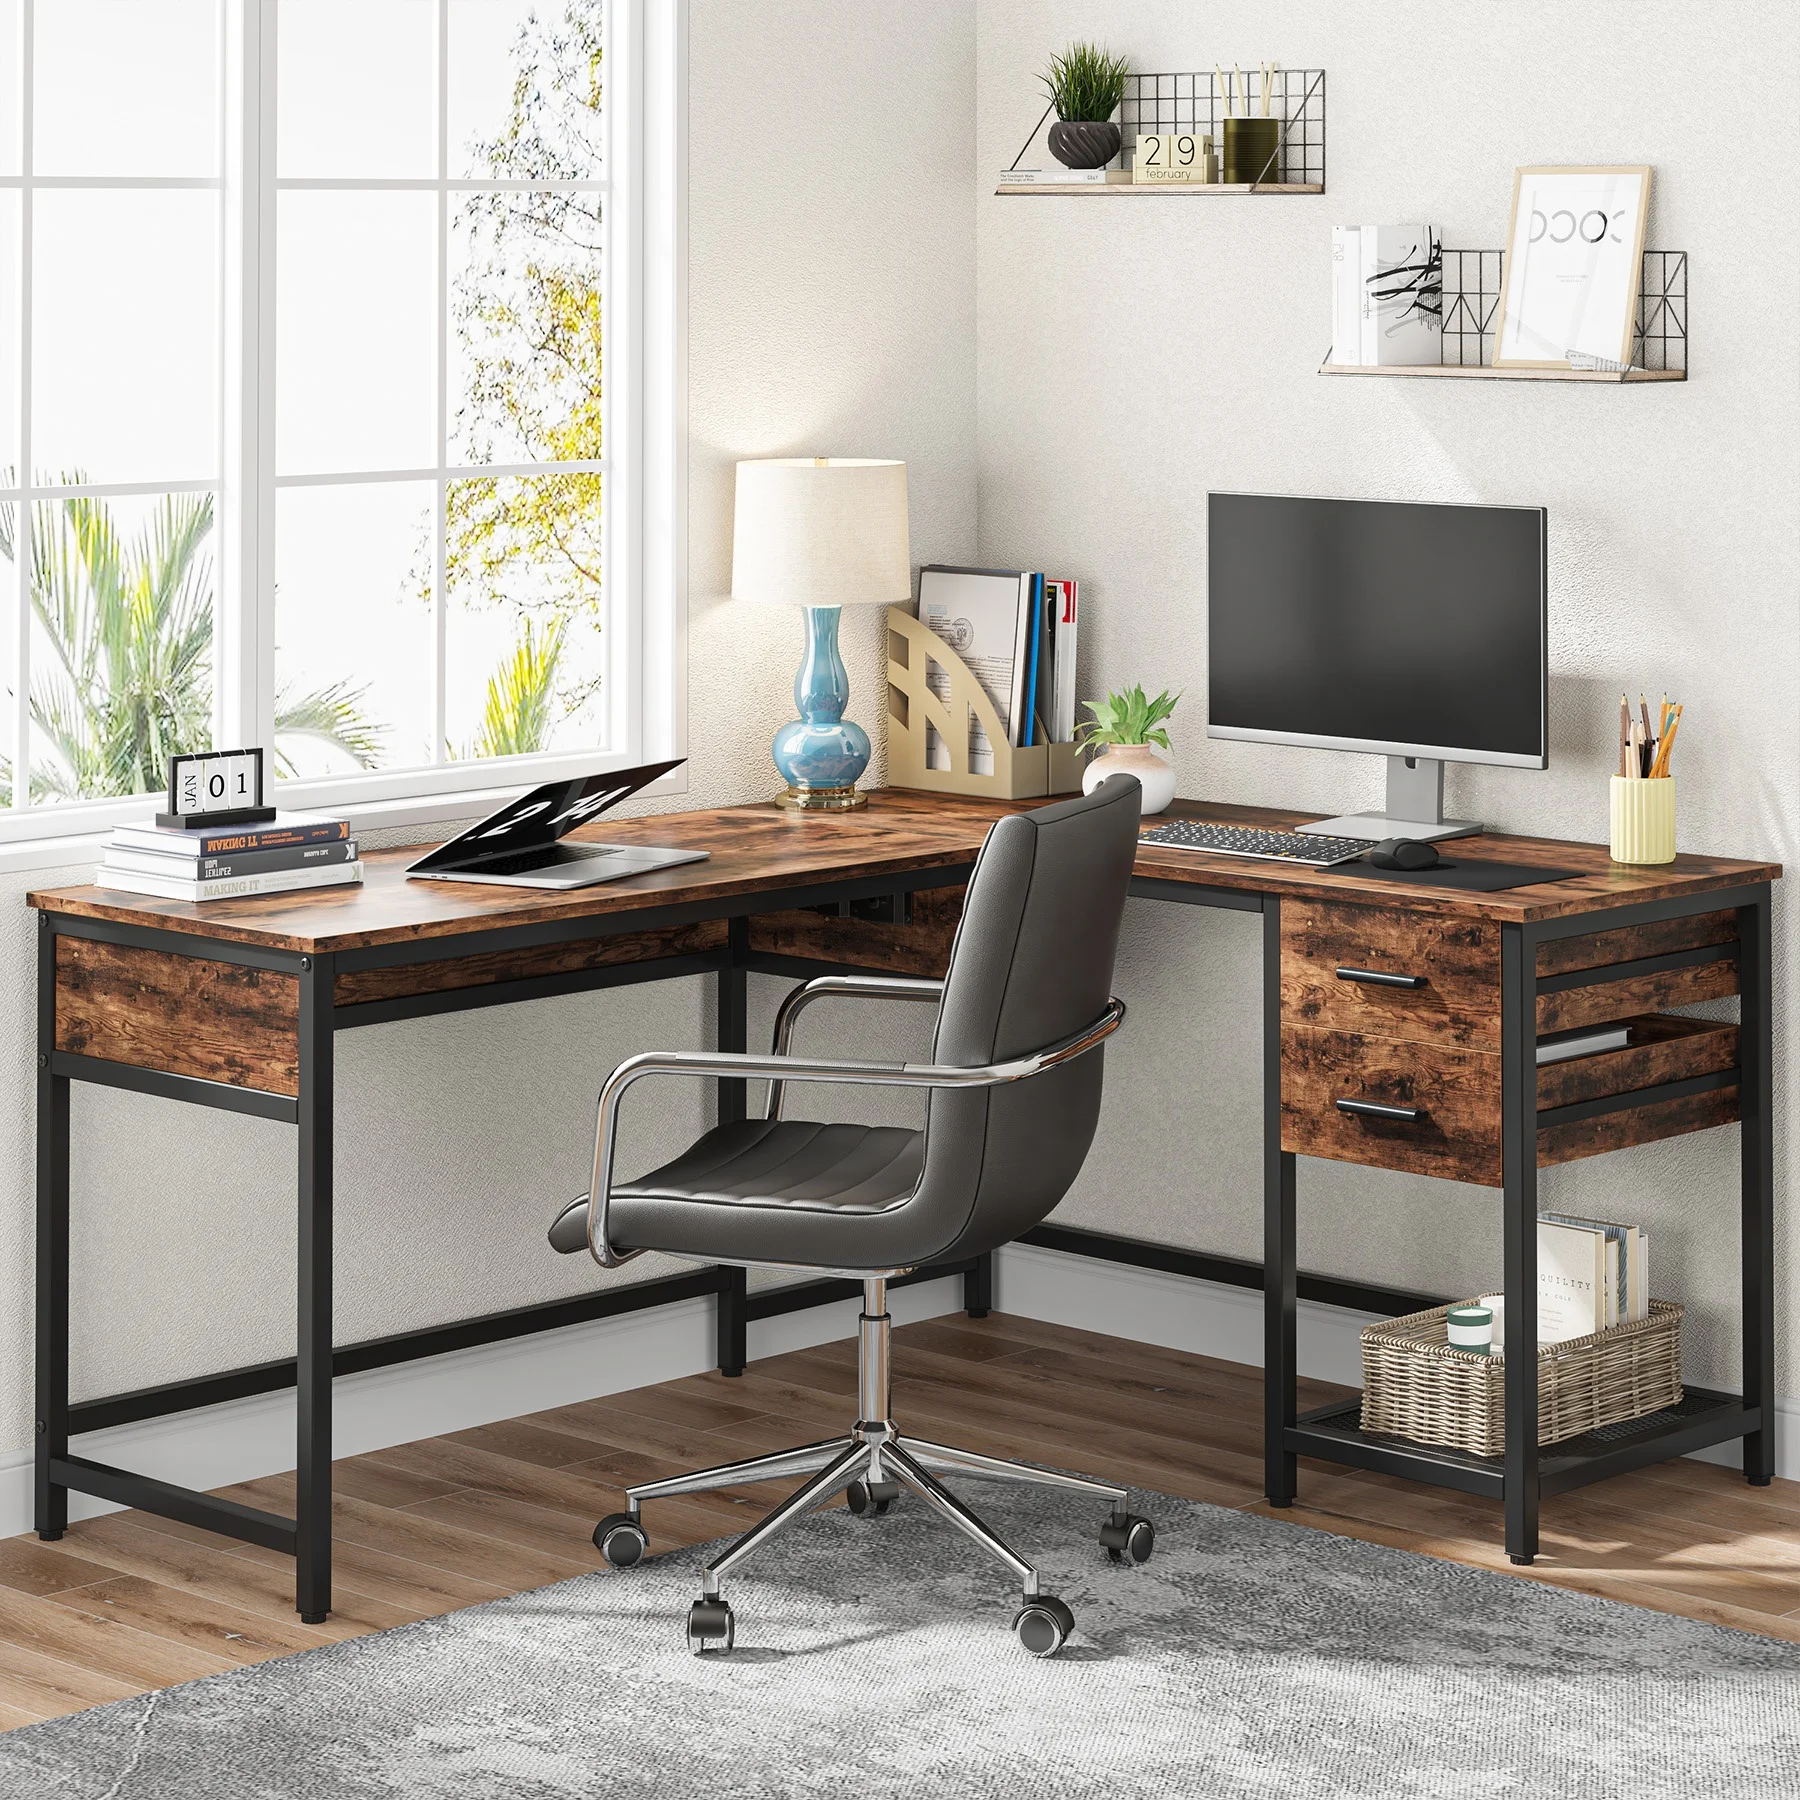 Tribesigns 59 Inch L Shaped Lift Top Table with 2 Drawers Height Adjustable Corner Computer Desk for Home Office